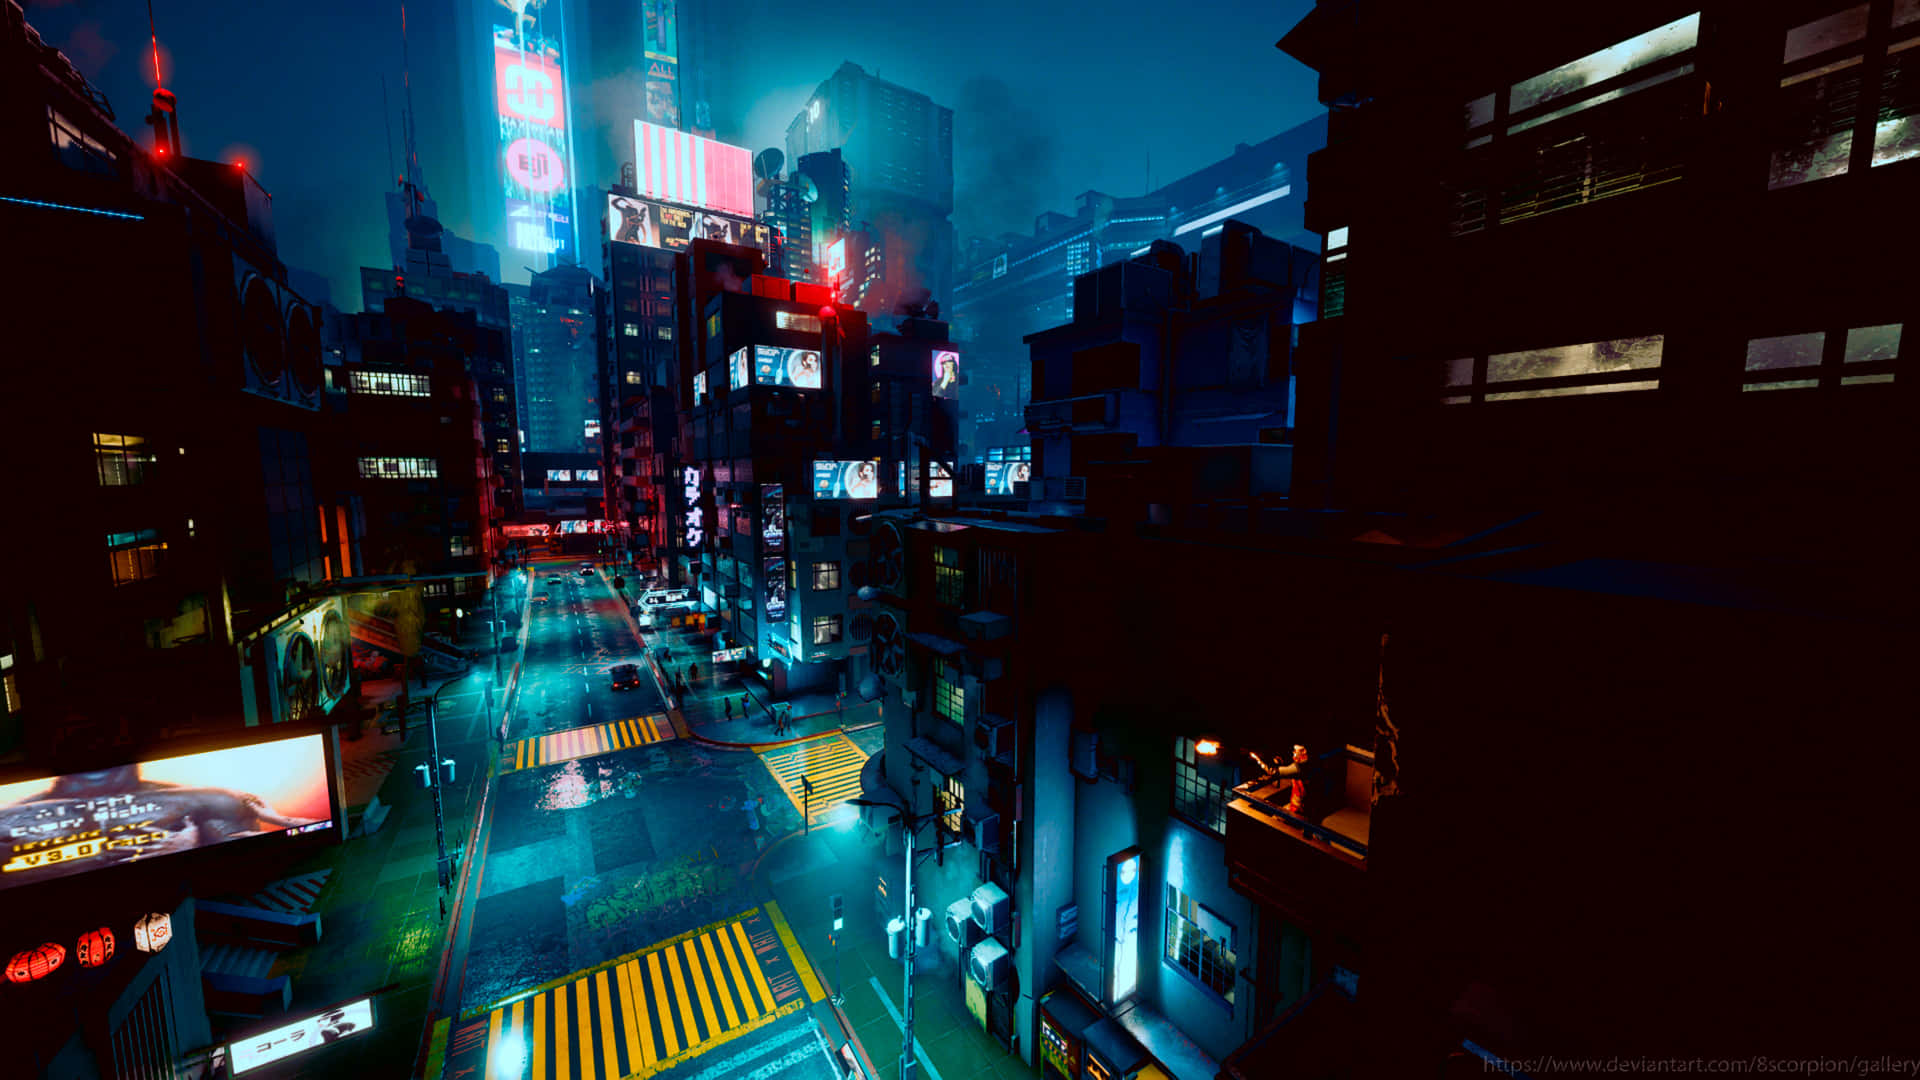 Beyond the neon skyline, a dystopian future awaits in Night City. Wallpaper